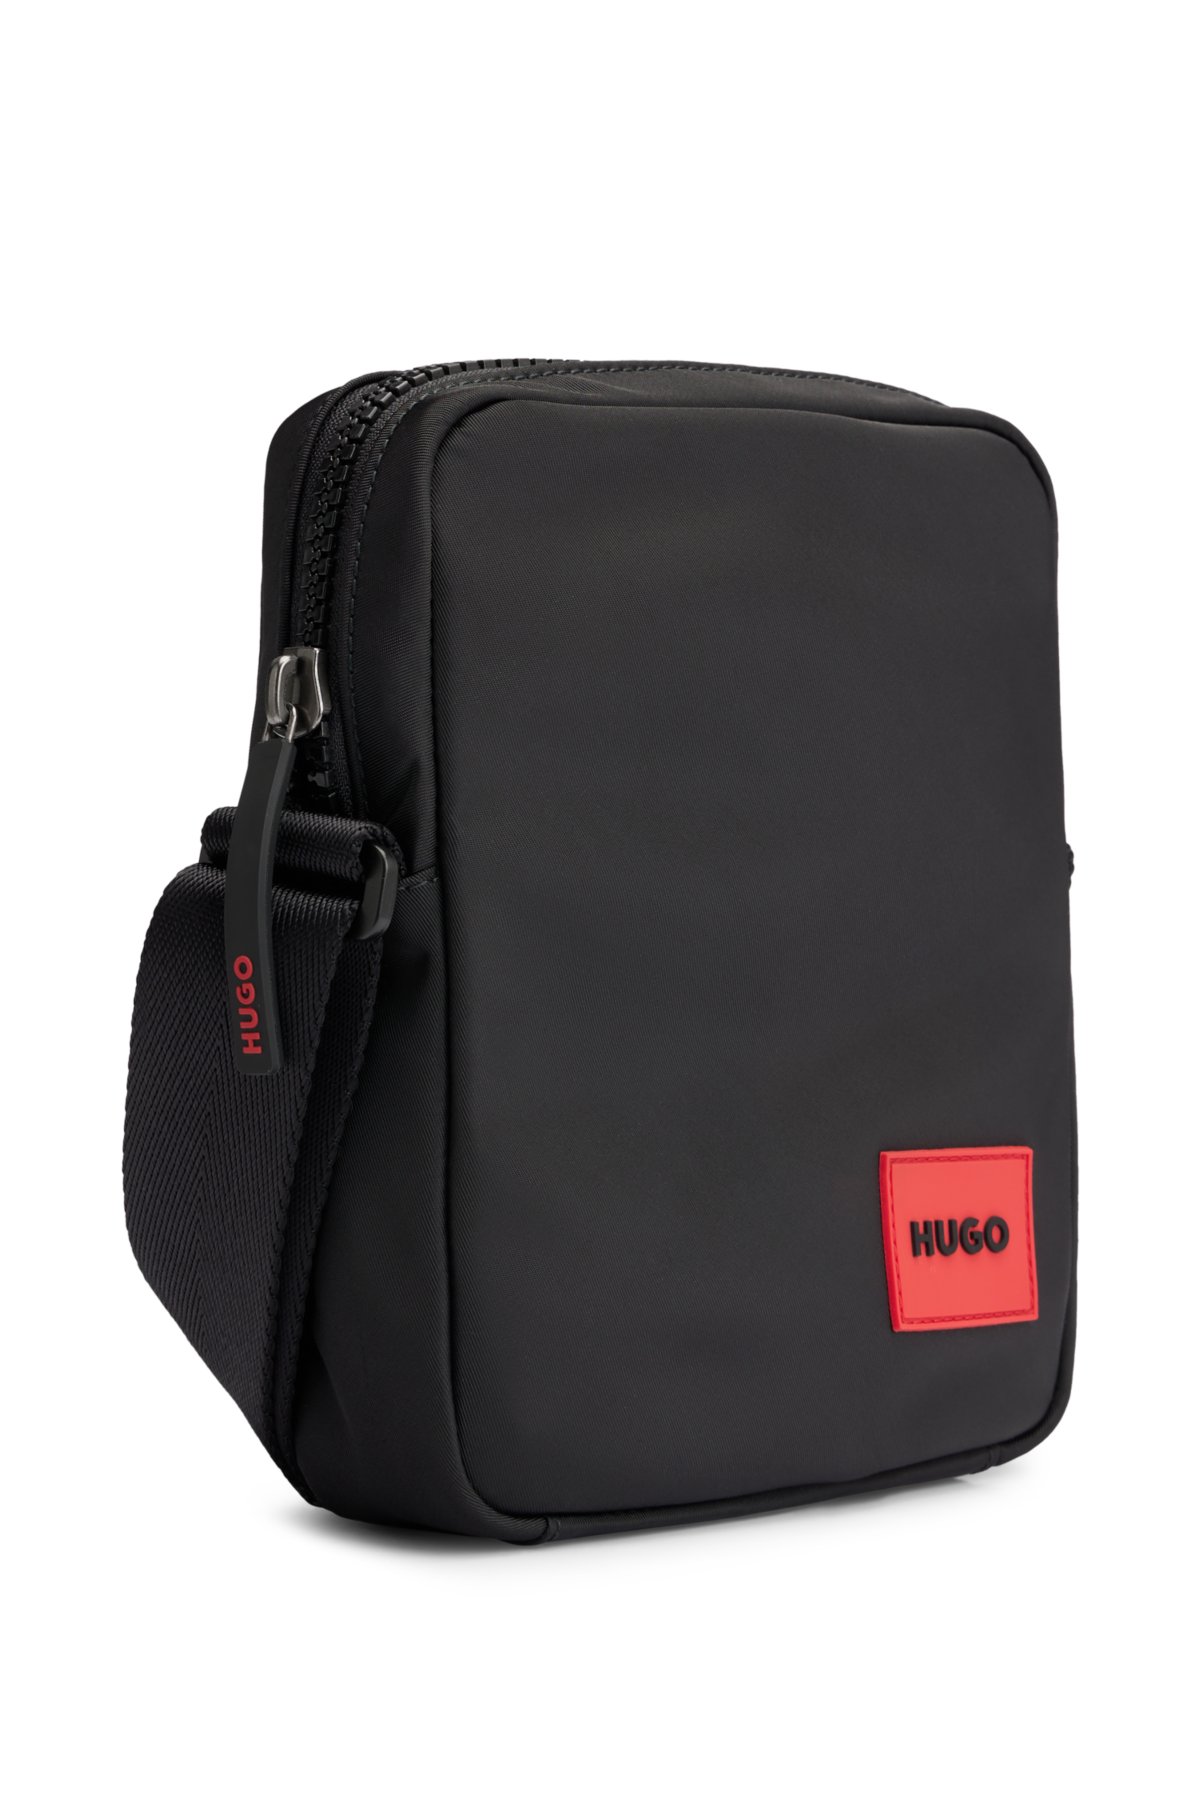 Reporter bag with red rubber logo label, Black